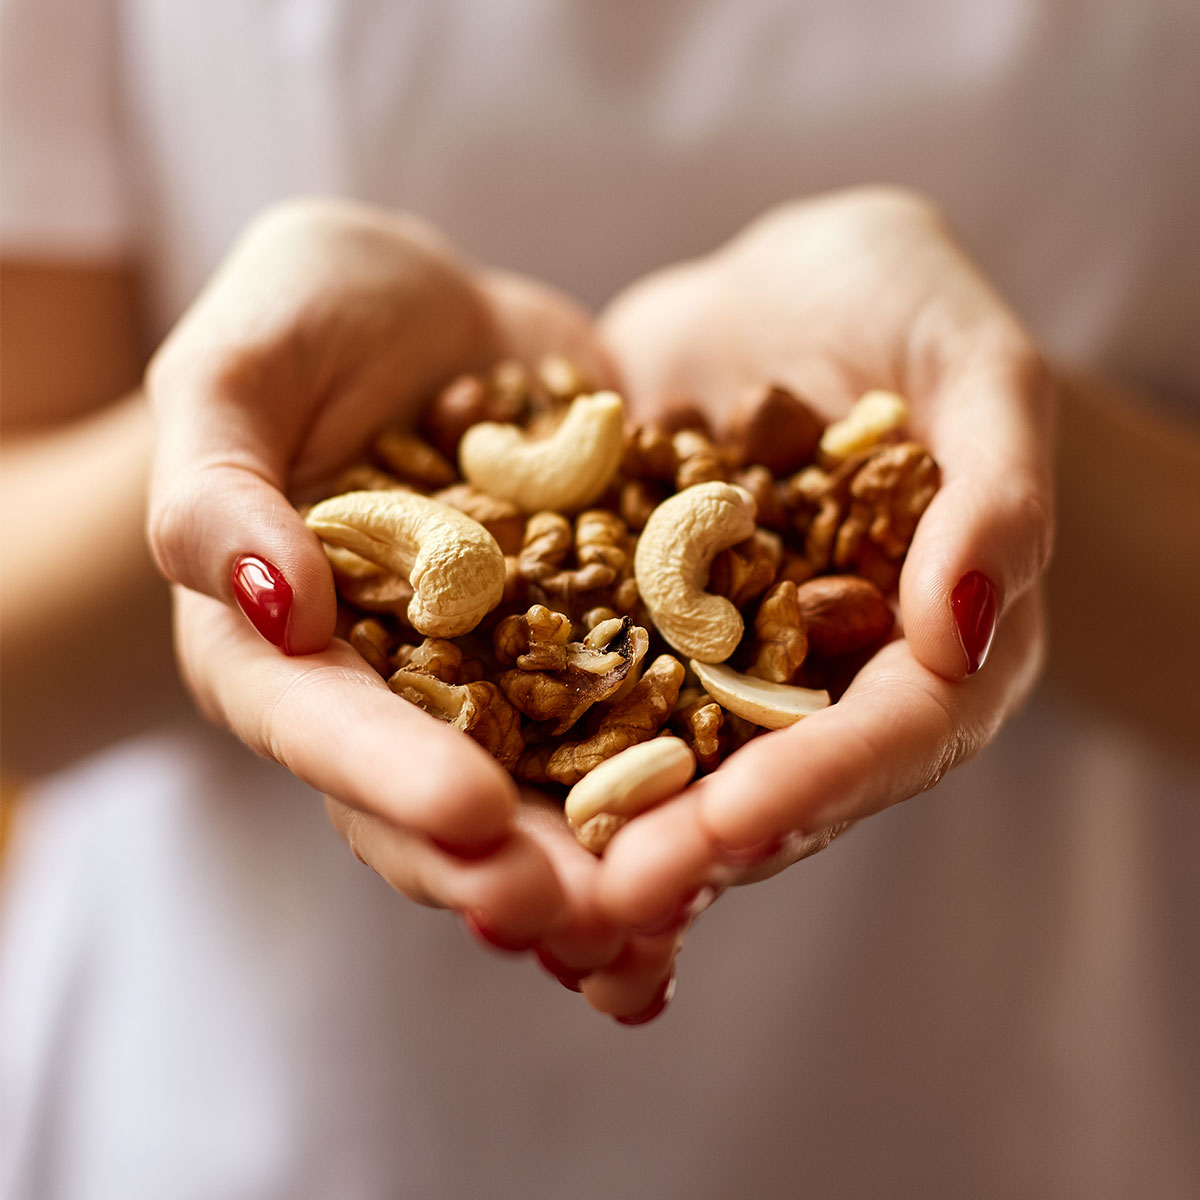 3 Nuts To Enhance Your Heart Health And Mood Over 40 - SHEfinds